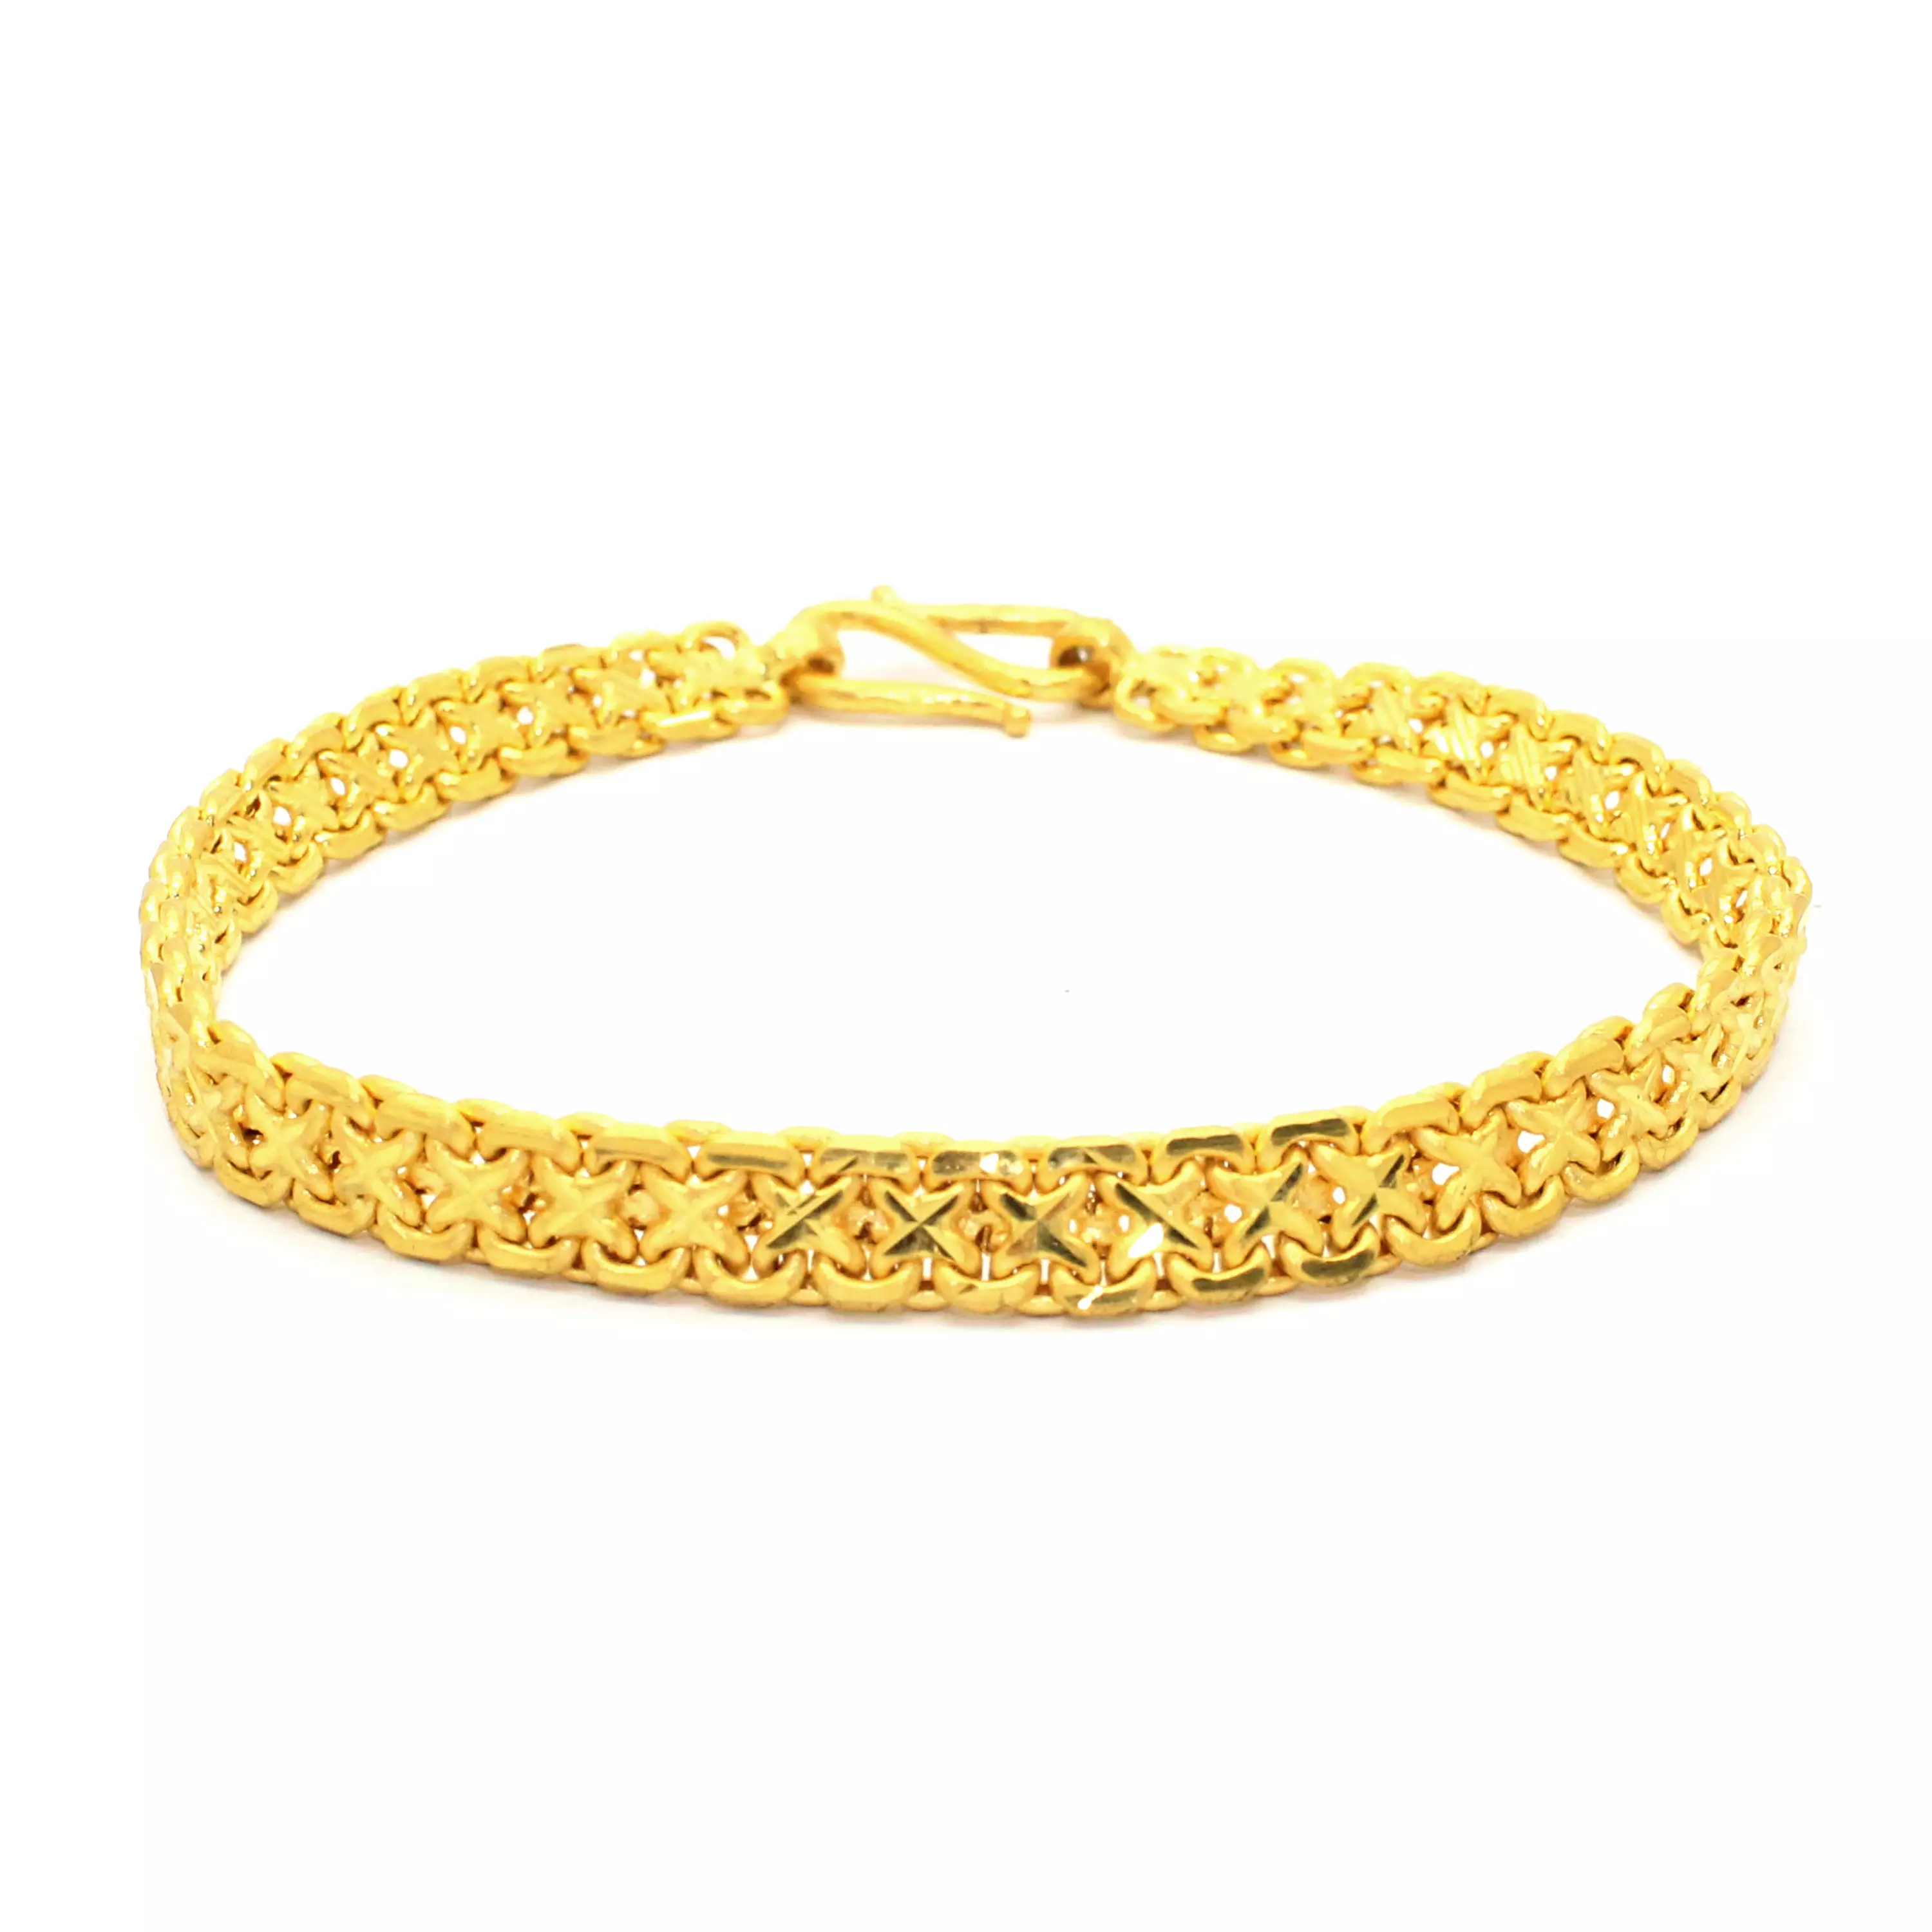 Mens Solid Jewelry: 24k Yellow Gold Link Solid Gold Bracelet Womens, 6.5MM  Width, 20CM Length From Igoreming, $5.99 | DHgate.Com